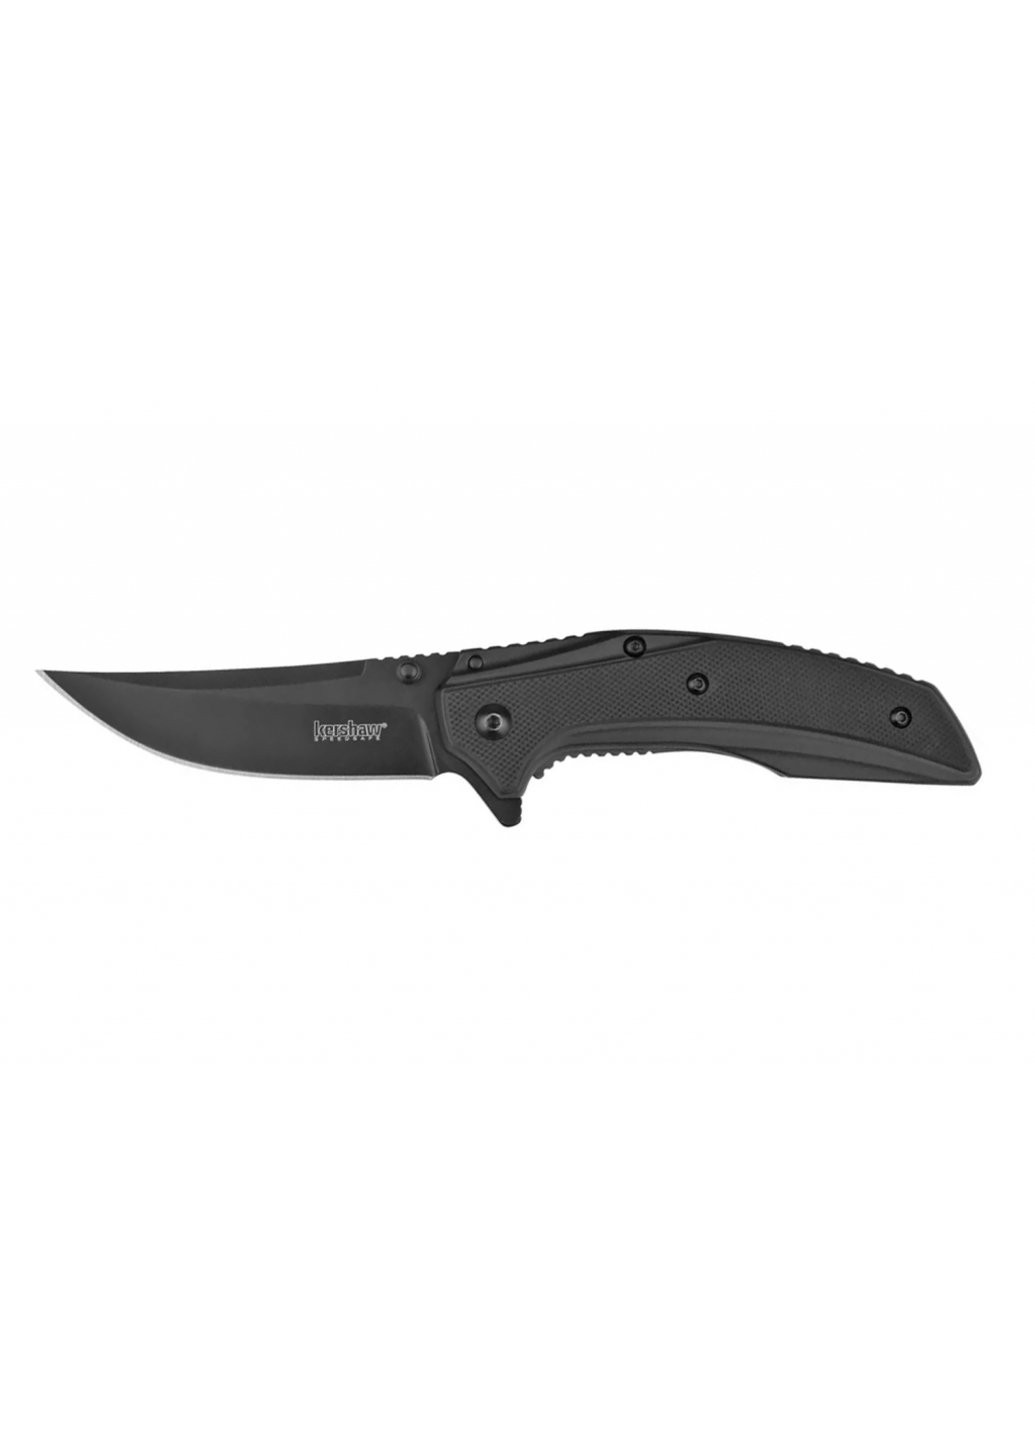 Нож Outright Black (8320BLK) Kershaw (257223557)